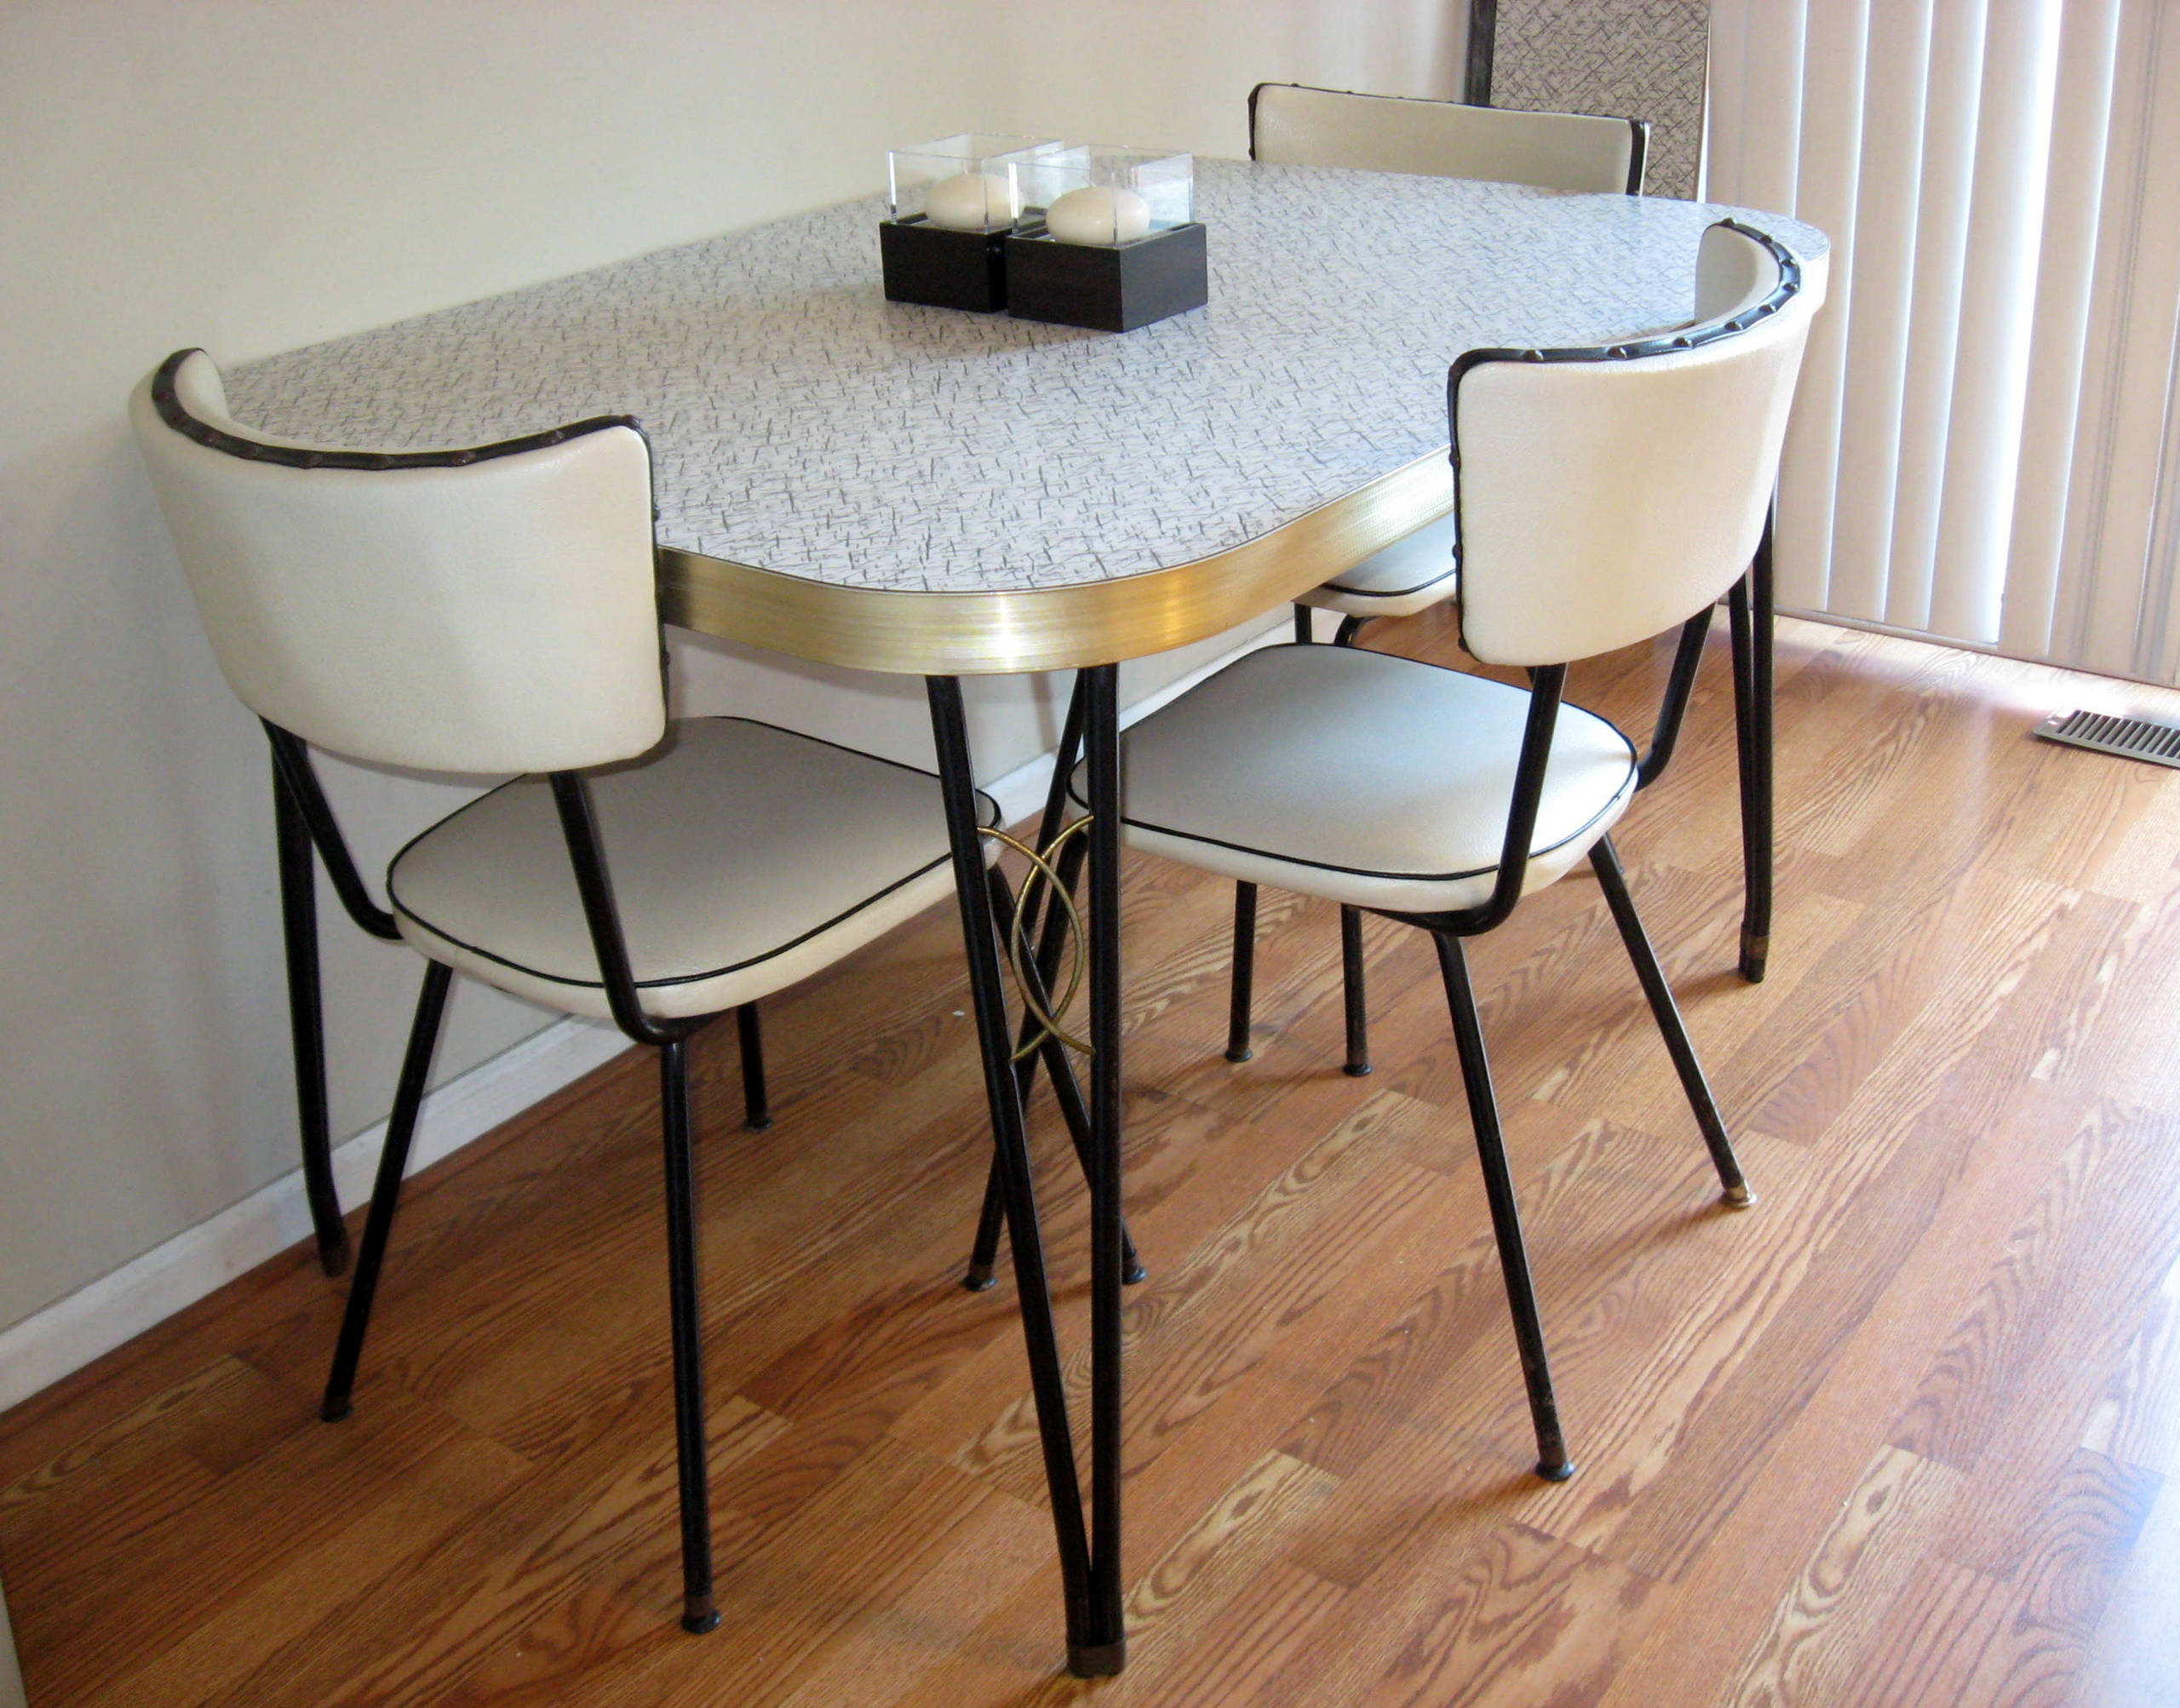 Retro Kitchen Table And Chairs Visualhunt, Vintage Metal Kitchen Table And Chairs